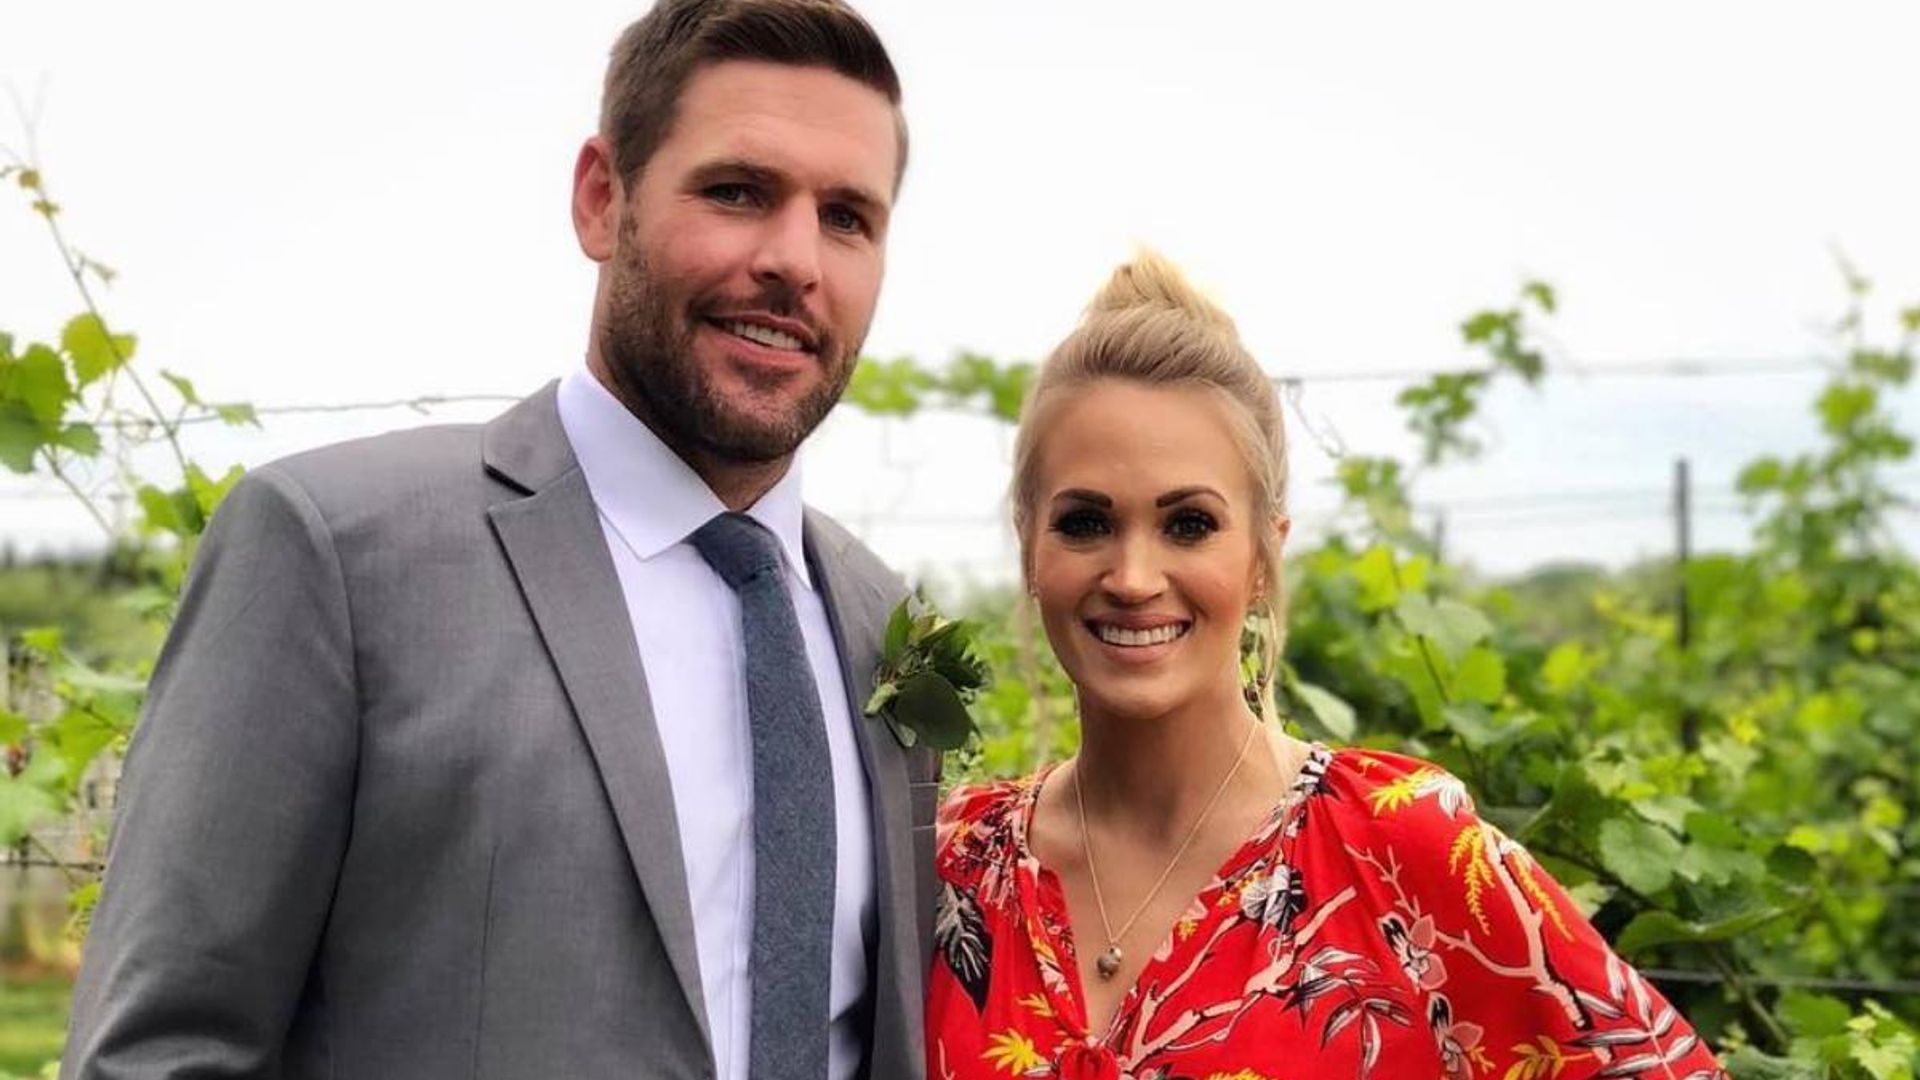 Carrie Underwood's husband breaks social media silence with major personal announcement | HELLO!